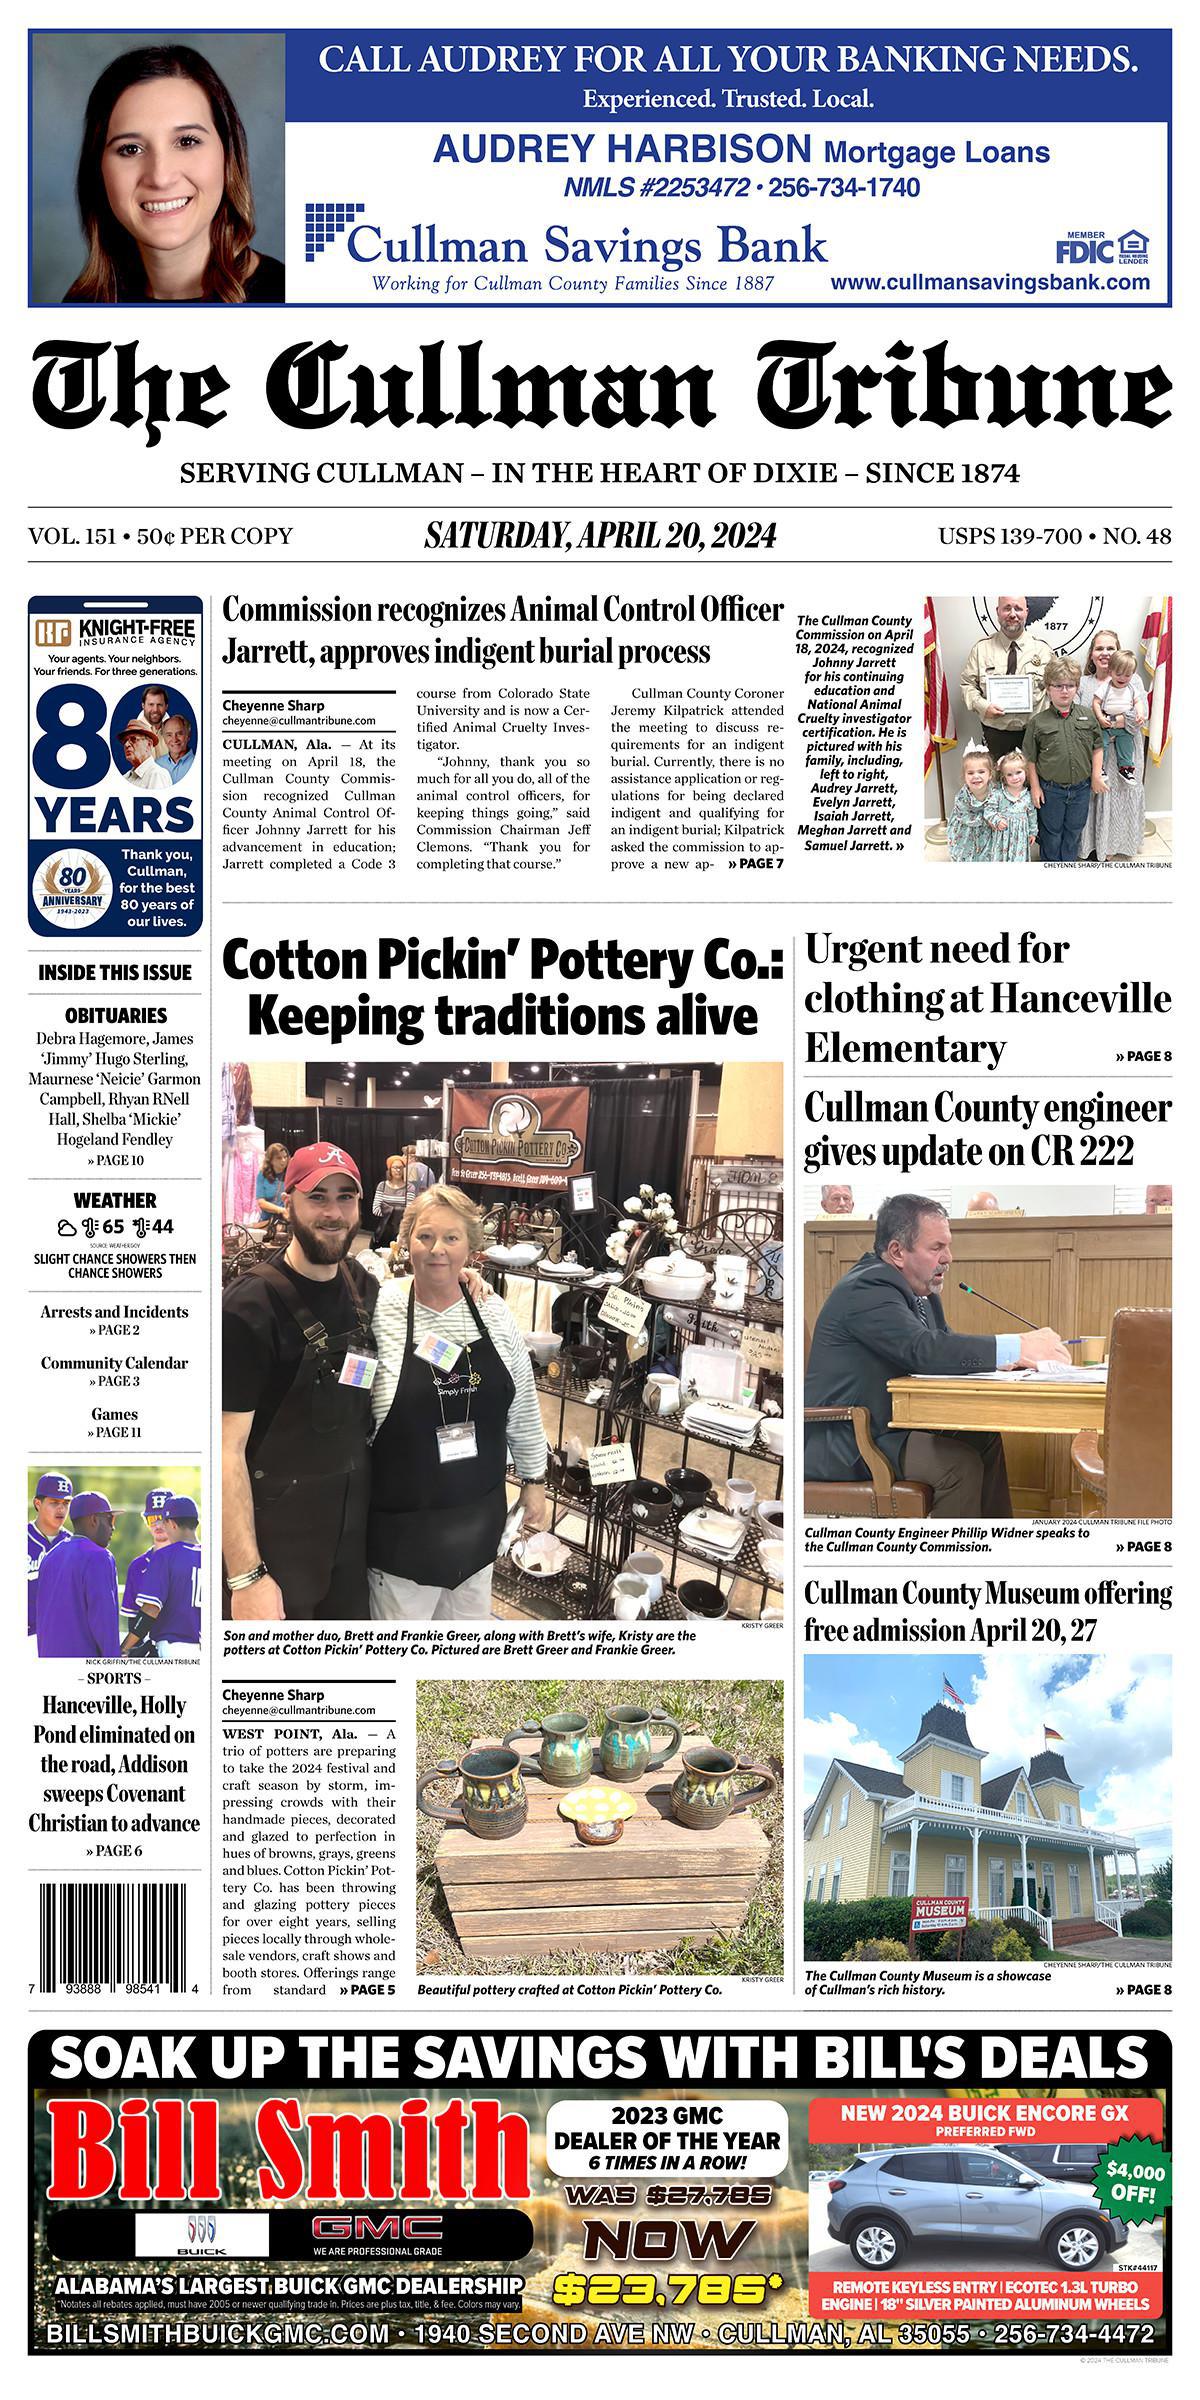 Good Morning Cullman! The 04-20-2024 edition of the Cullman Tribune is now ready to view.